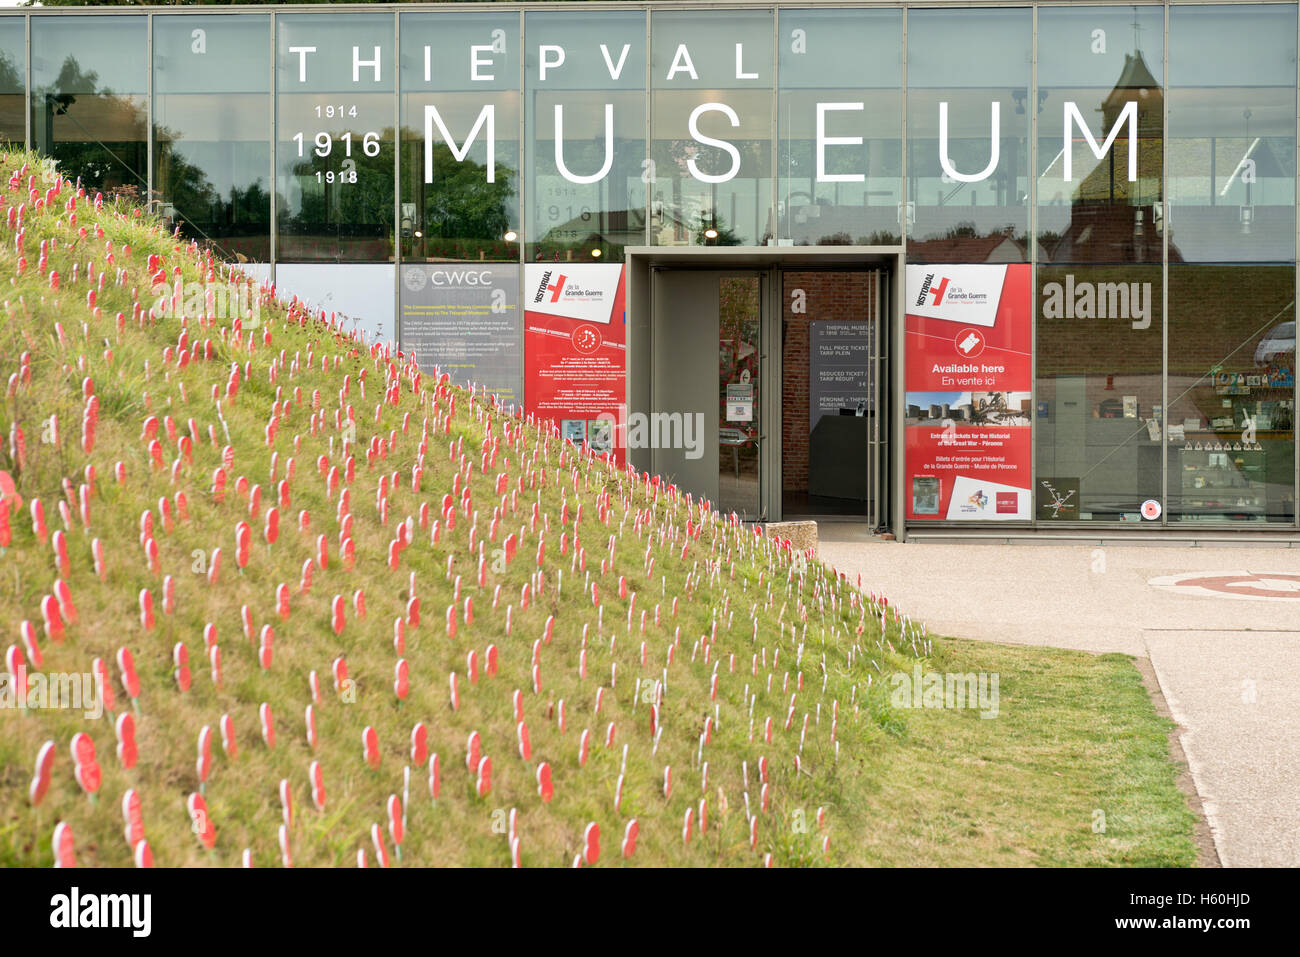 Thiepval Memorial visitors center & museum on the Somme, France. Showing the entrance & wooden remembrance poppies Stock Photo